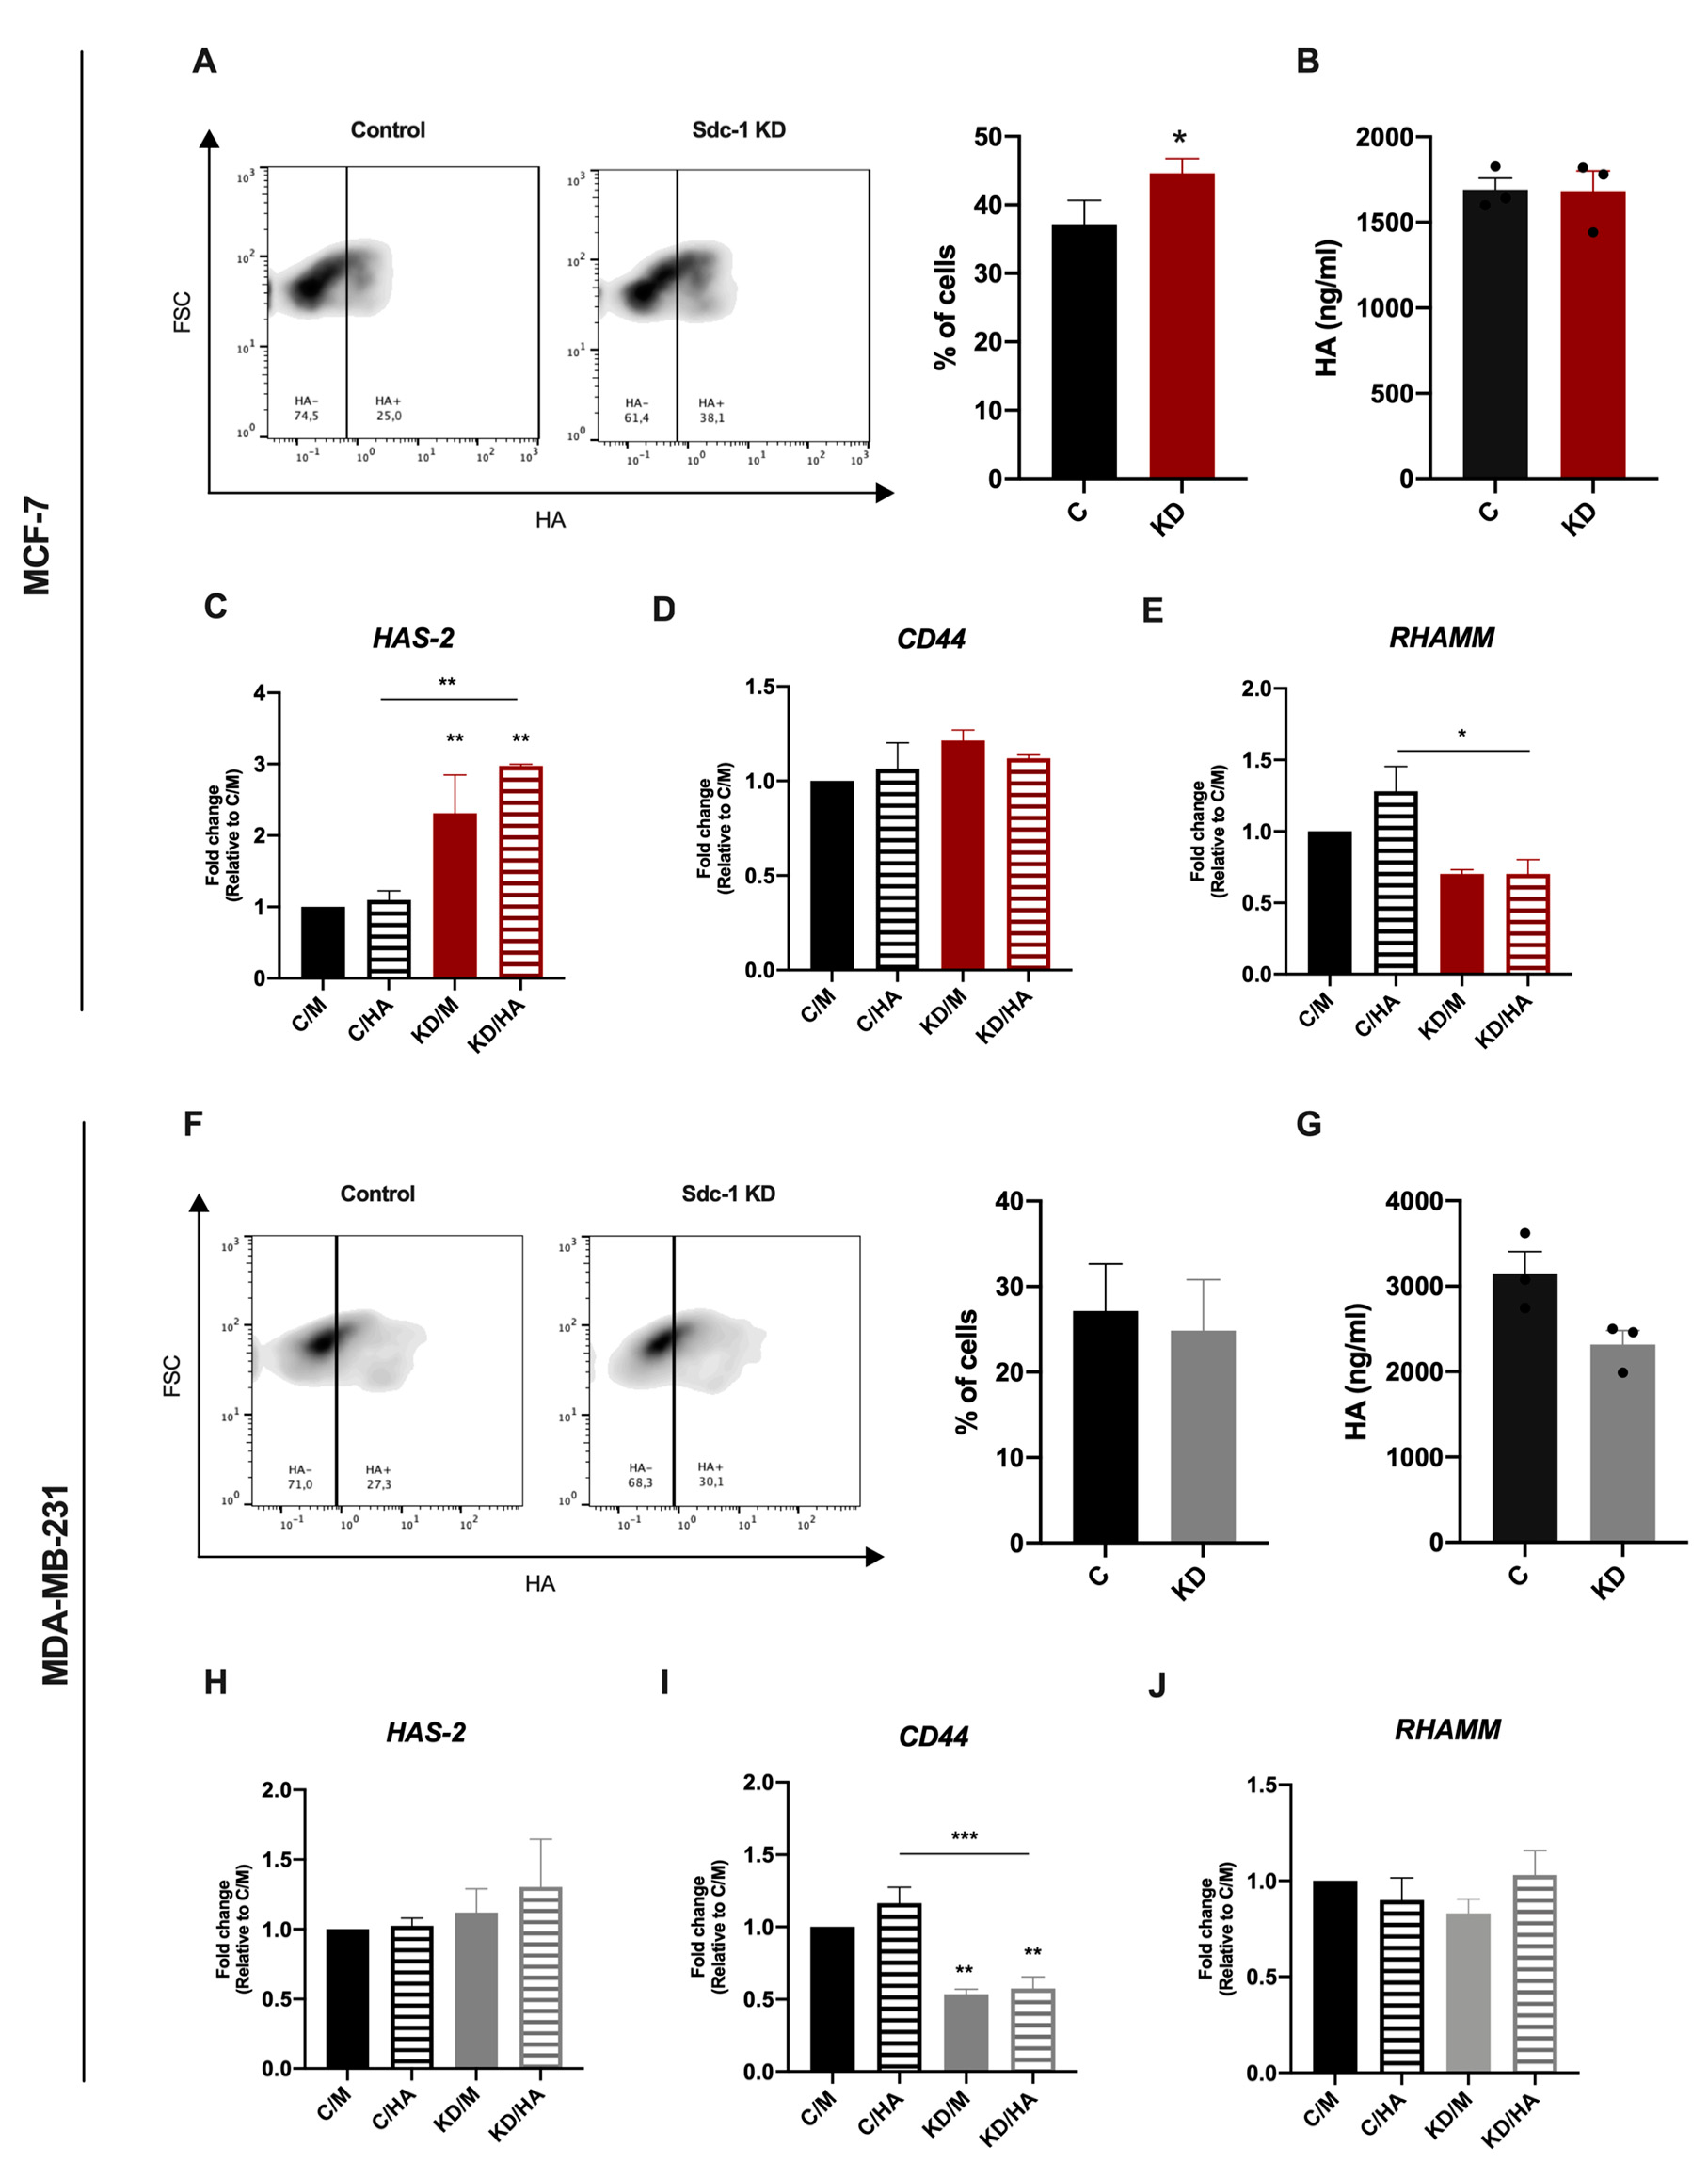 IJMS | Free Full-Text | Syndecan-1 Depletion Has a Differential Impact on  Hyaluronic Acid Metabolism and Tumor Cell Behavior in Luminal and  Triple-Negative Breast Cancer Cells